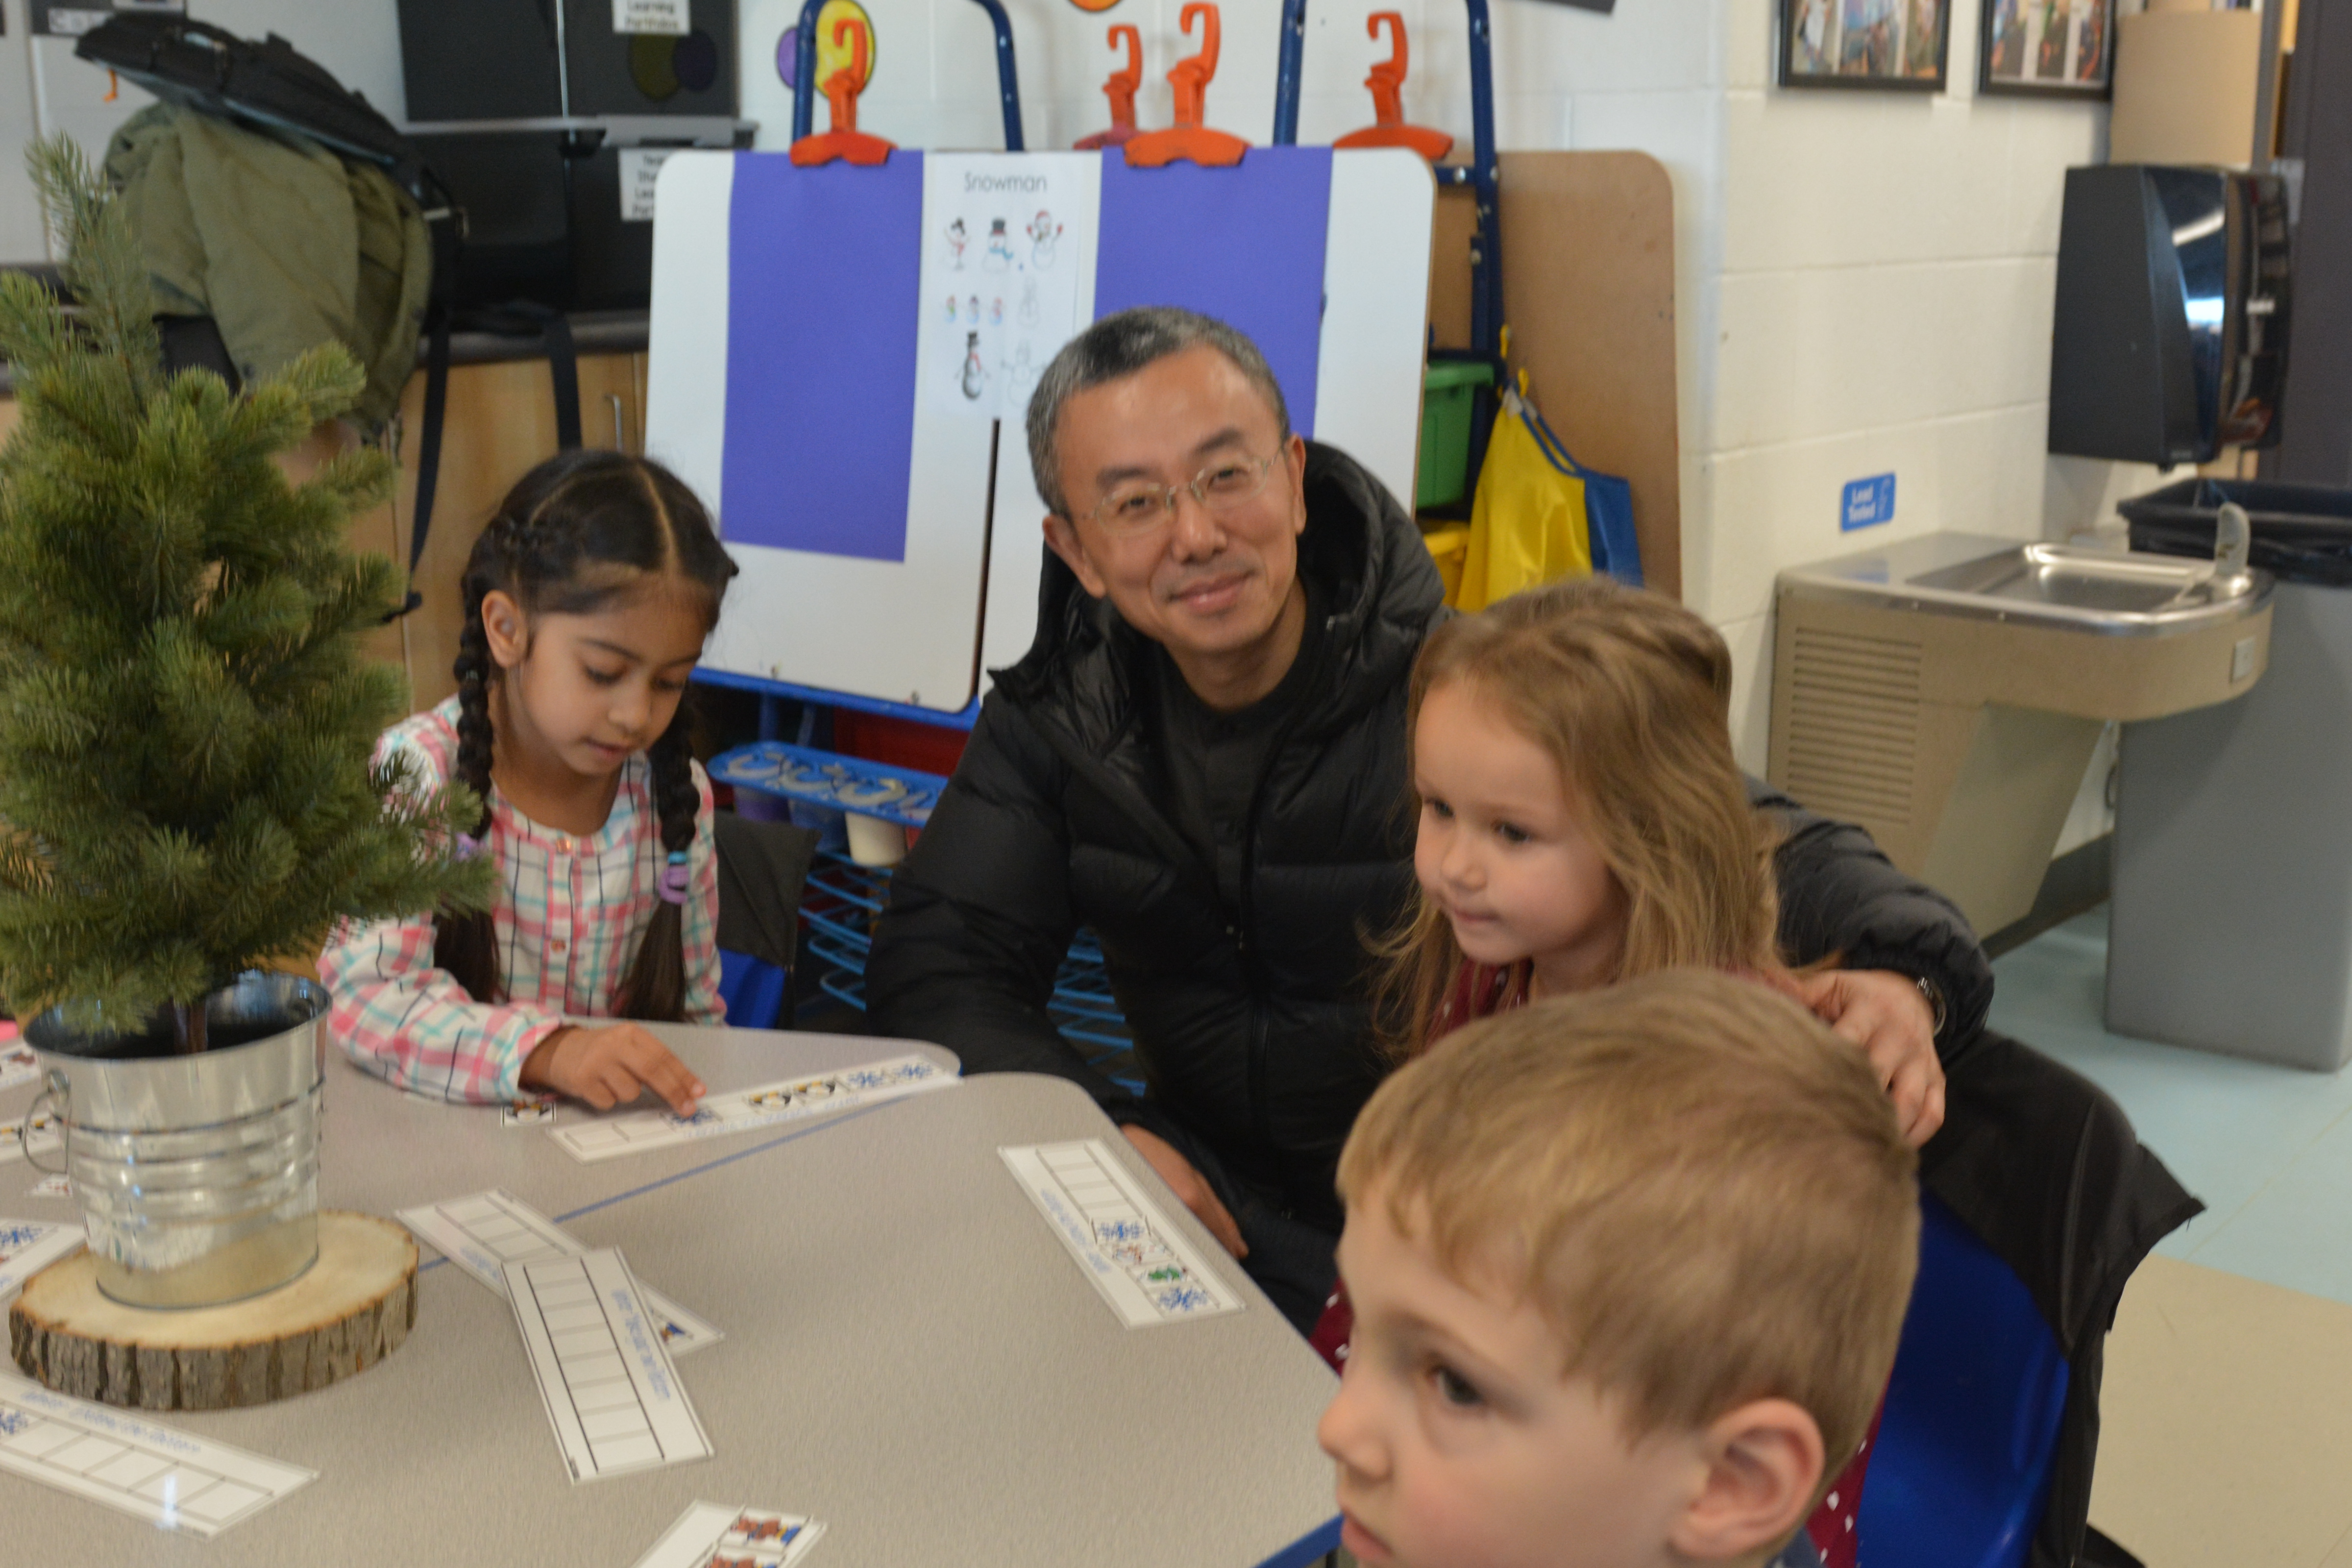 Trade Commissioner Peter Liao works with students at their desks.